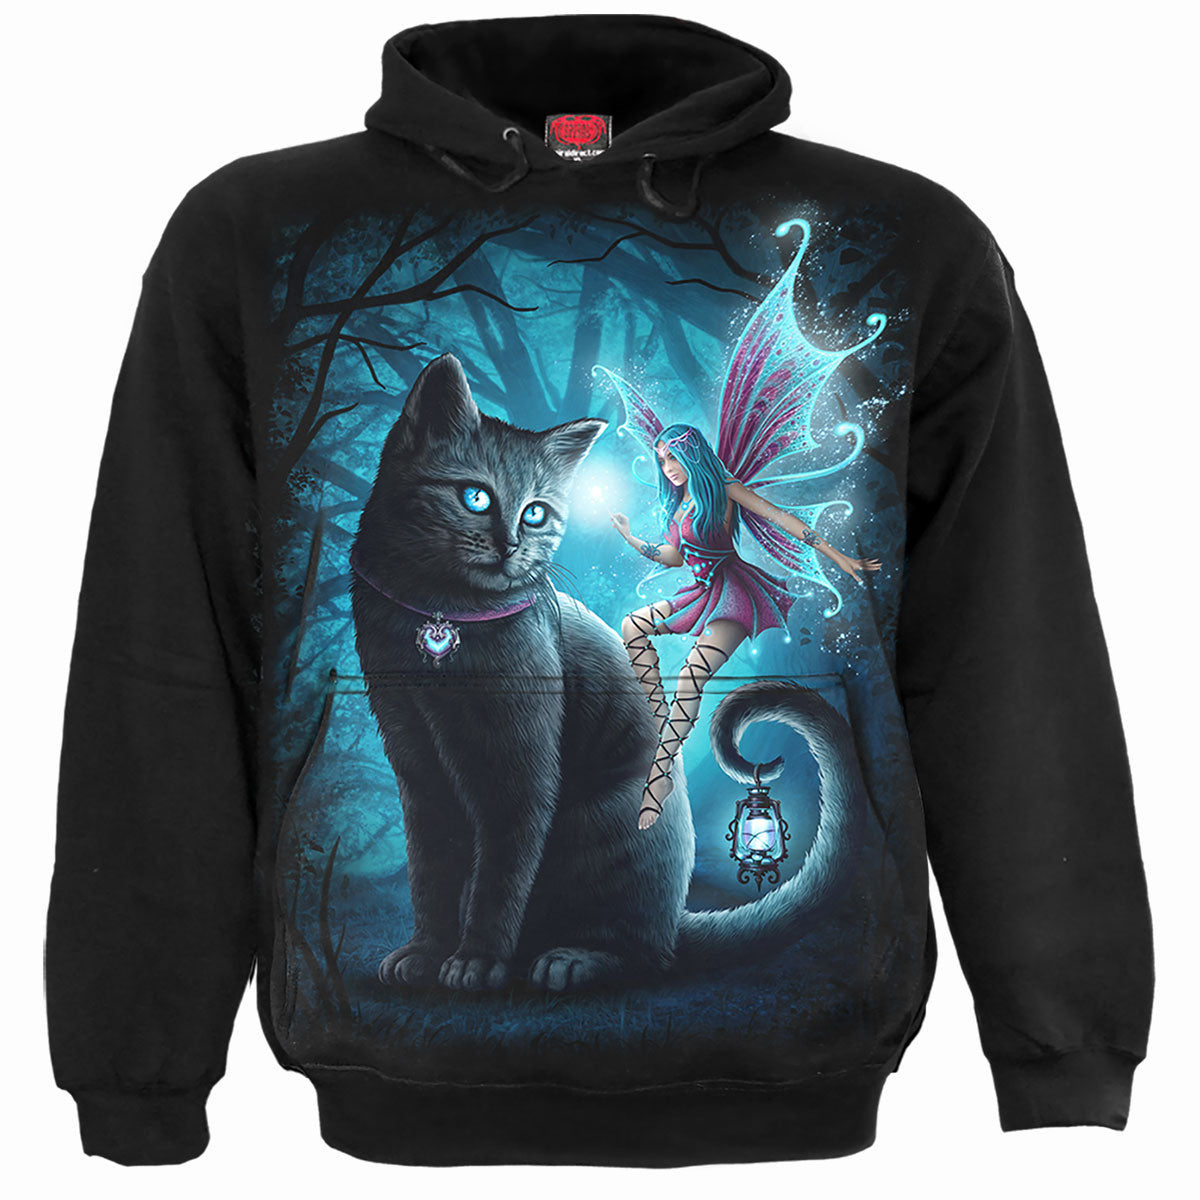 CAT AND FAIRY - Kids Front Print Hoody Black